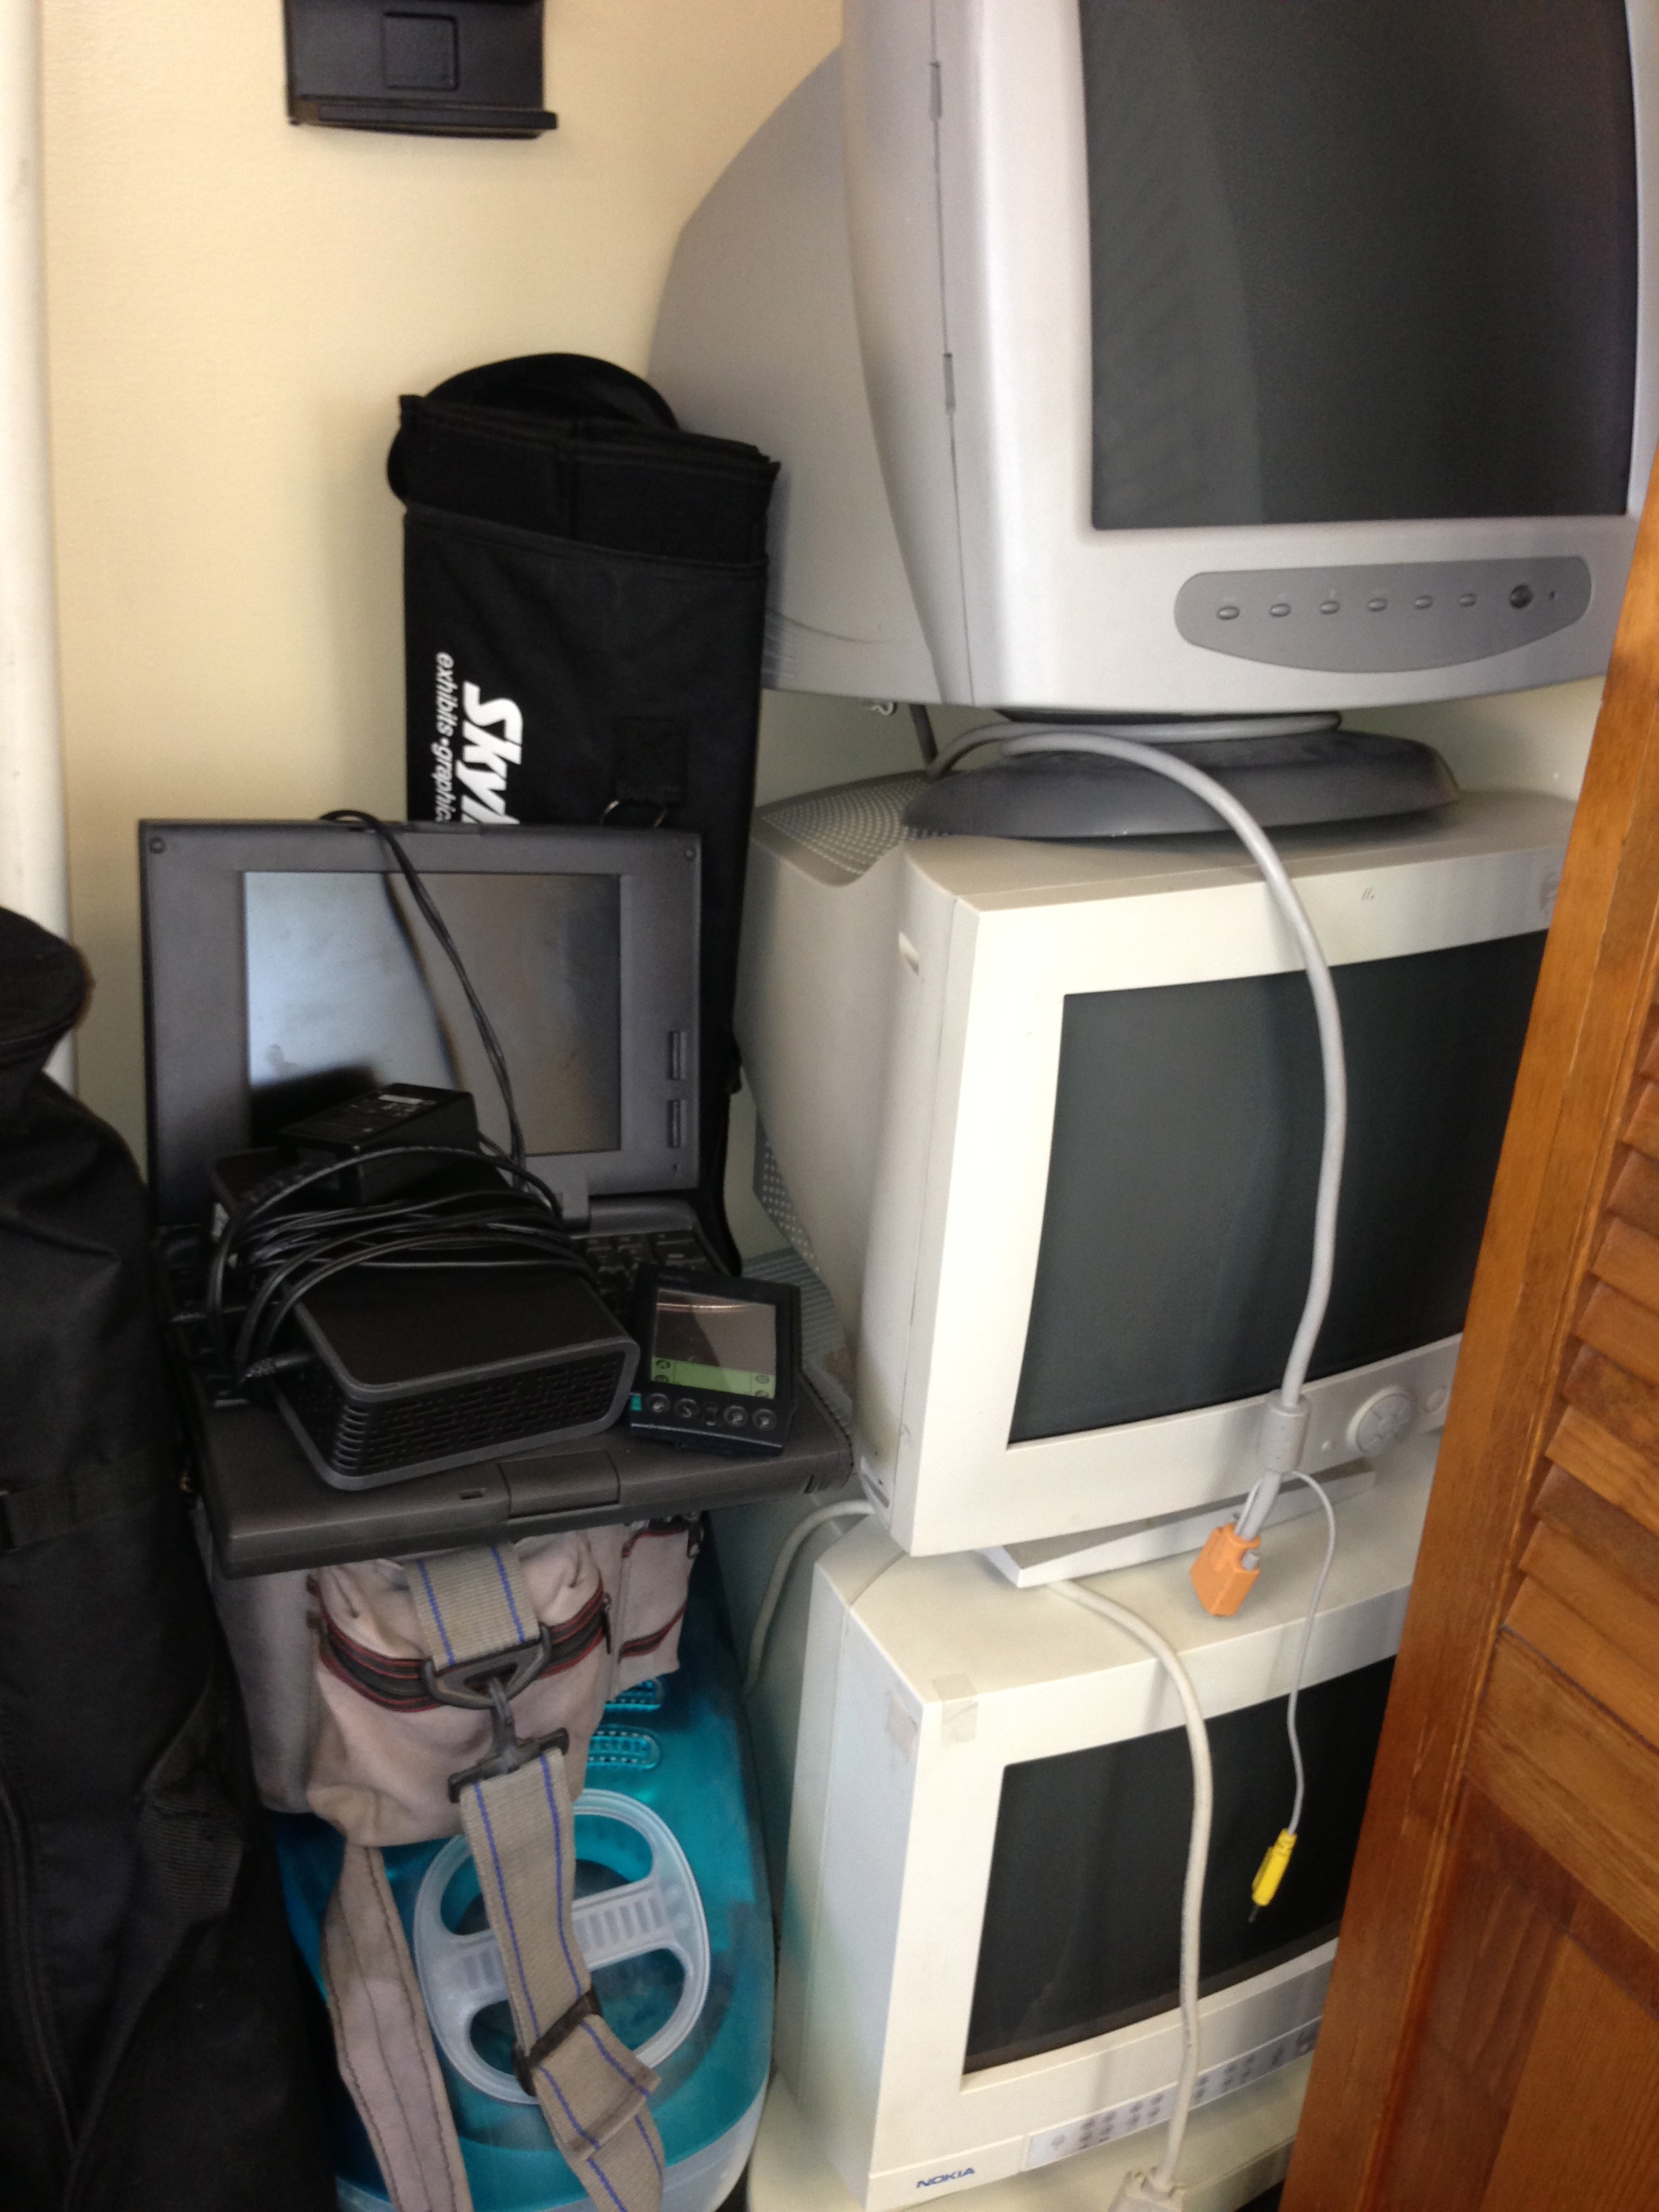 “Bring all of your old electronics to the Habitat for Humanity ReStore, including: computers, monitors, televisions, printers, mobile phones, laptops, DVD players, VCRs, microwaves, calculators, iPods, cables and wires, telephones, fax machines, scanners, computer parts, and more,” said Stumm.